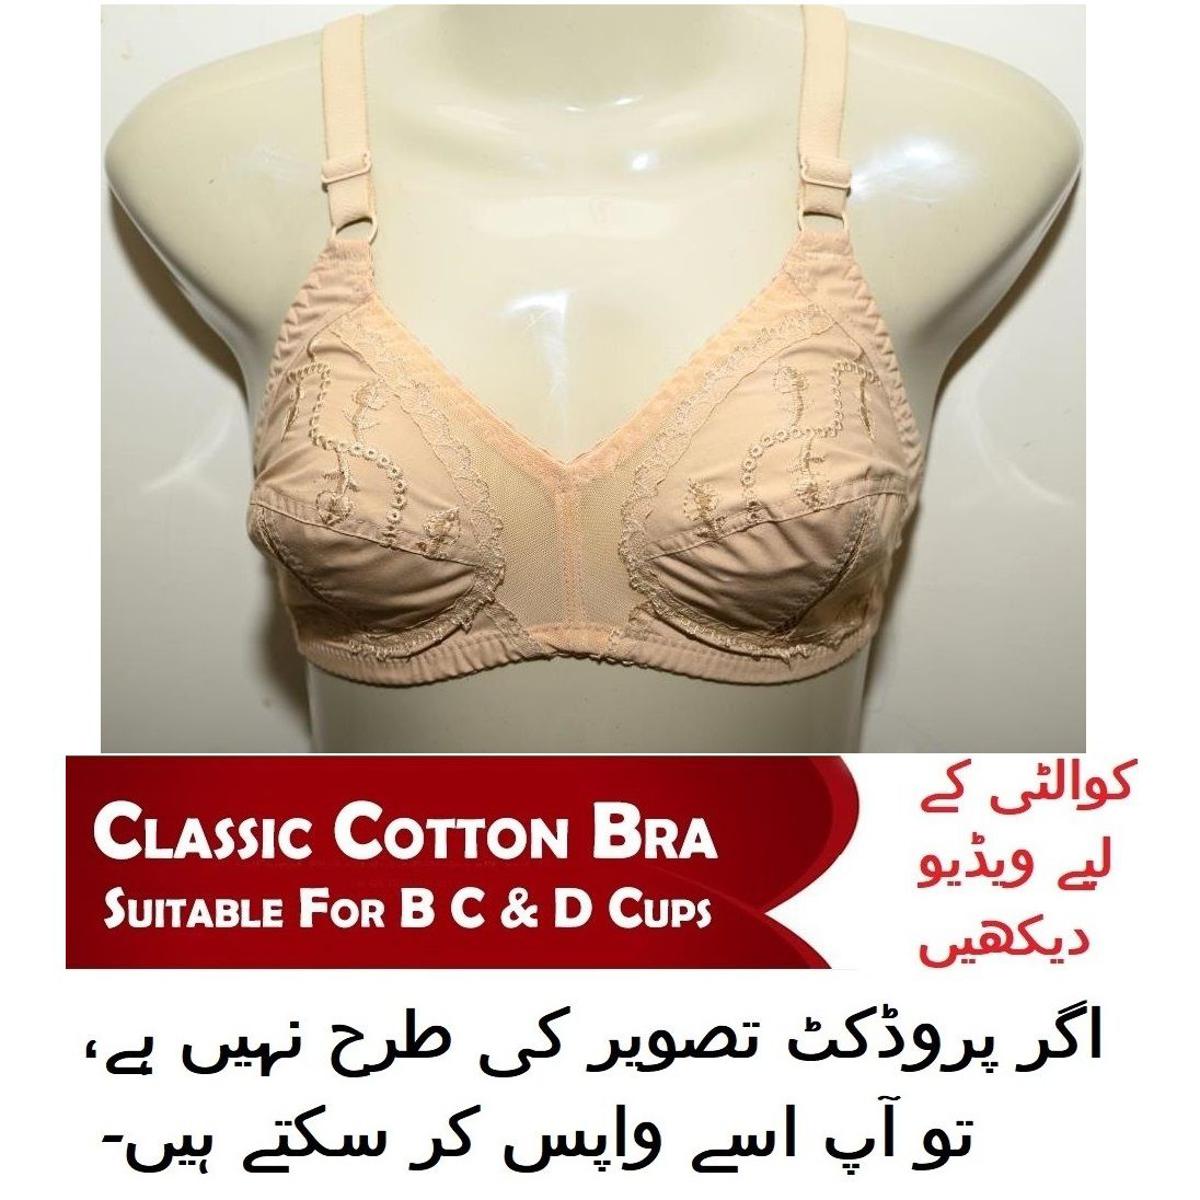 High Quality Cotton Skin Bra With Imported Material Non Padded for Girls  Wire Bras Single Color Brazier Underwear Blouse Undergarments for Women for  Girls